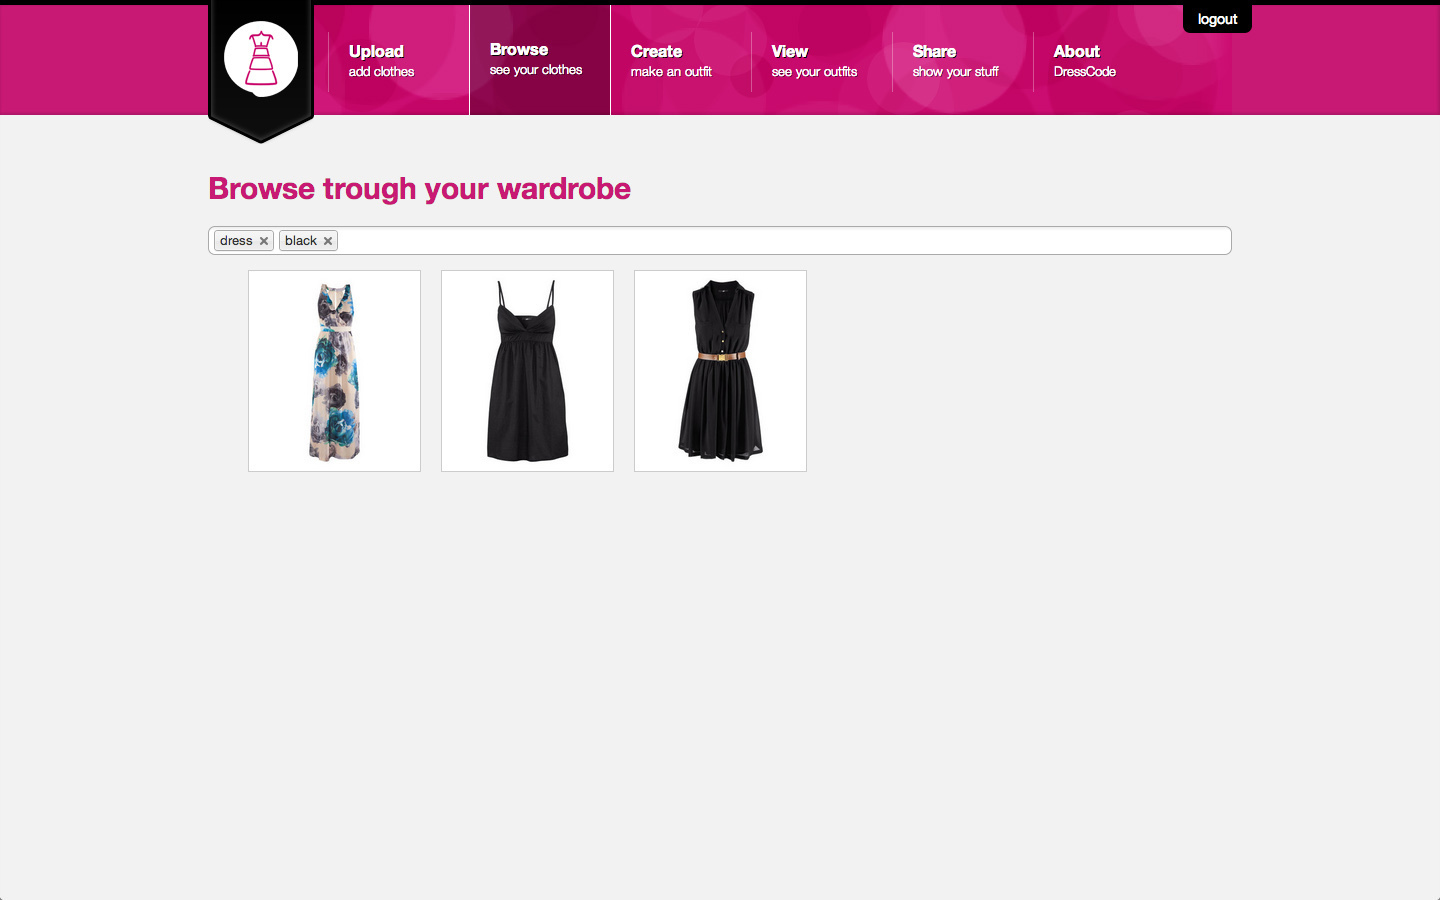 screenshot browsing tags dress and black of the web project dresscode